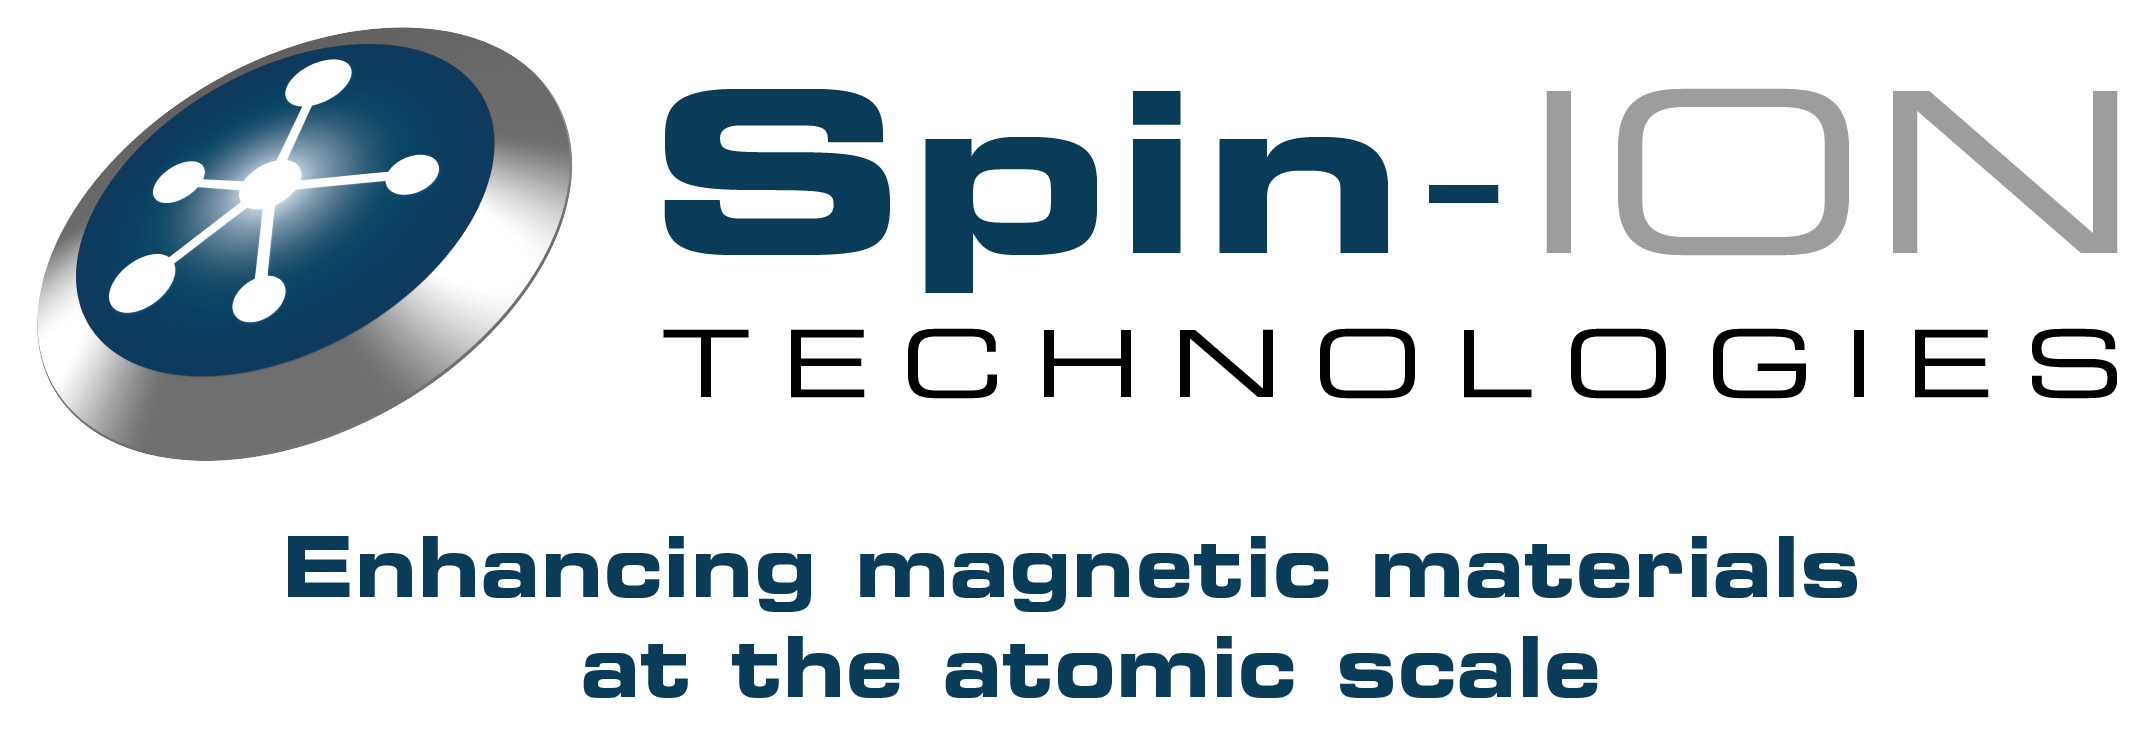 Spin-Ion Technologies